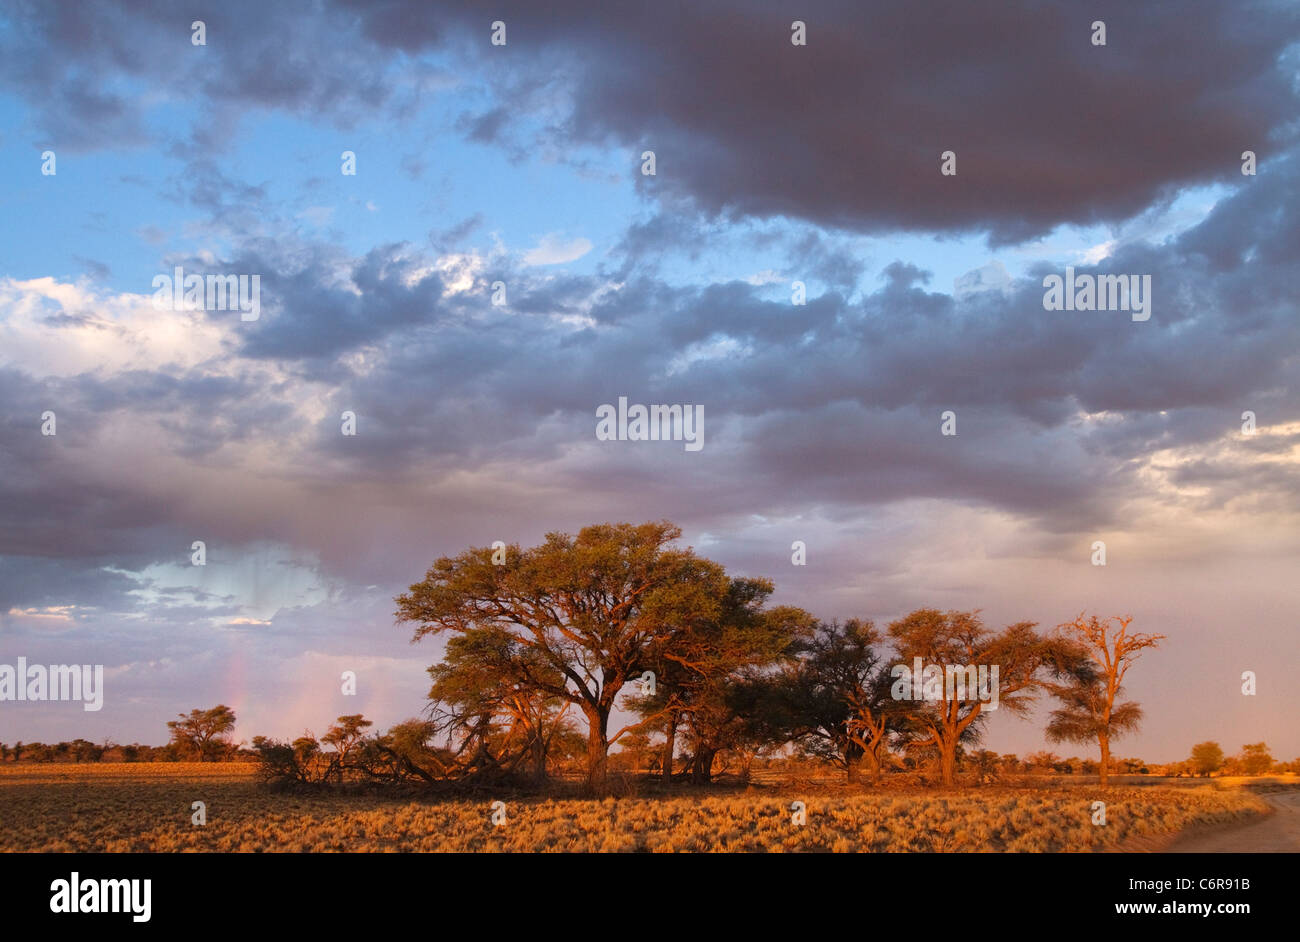 A cluster of Camelthorn trees (Acacia erioloba) in warm light viewed against a cloudy sky Stock Photo